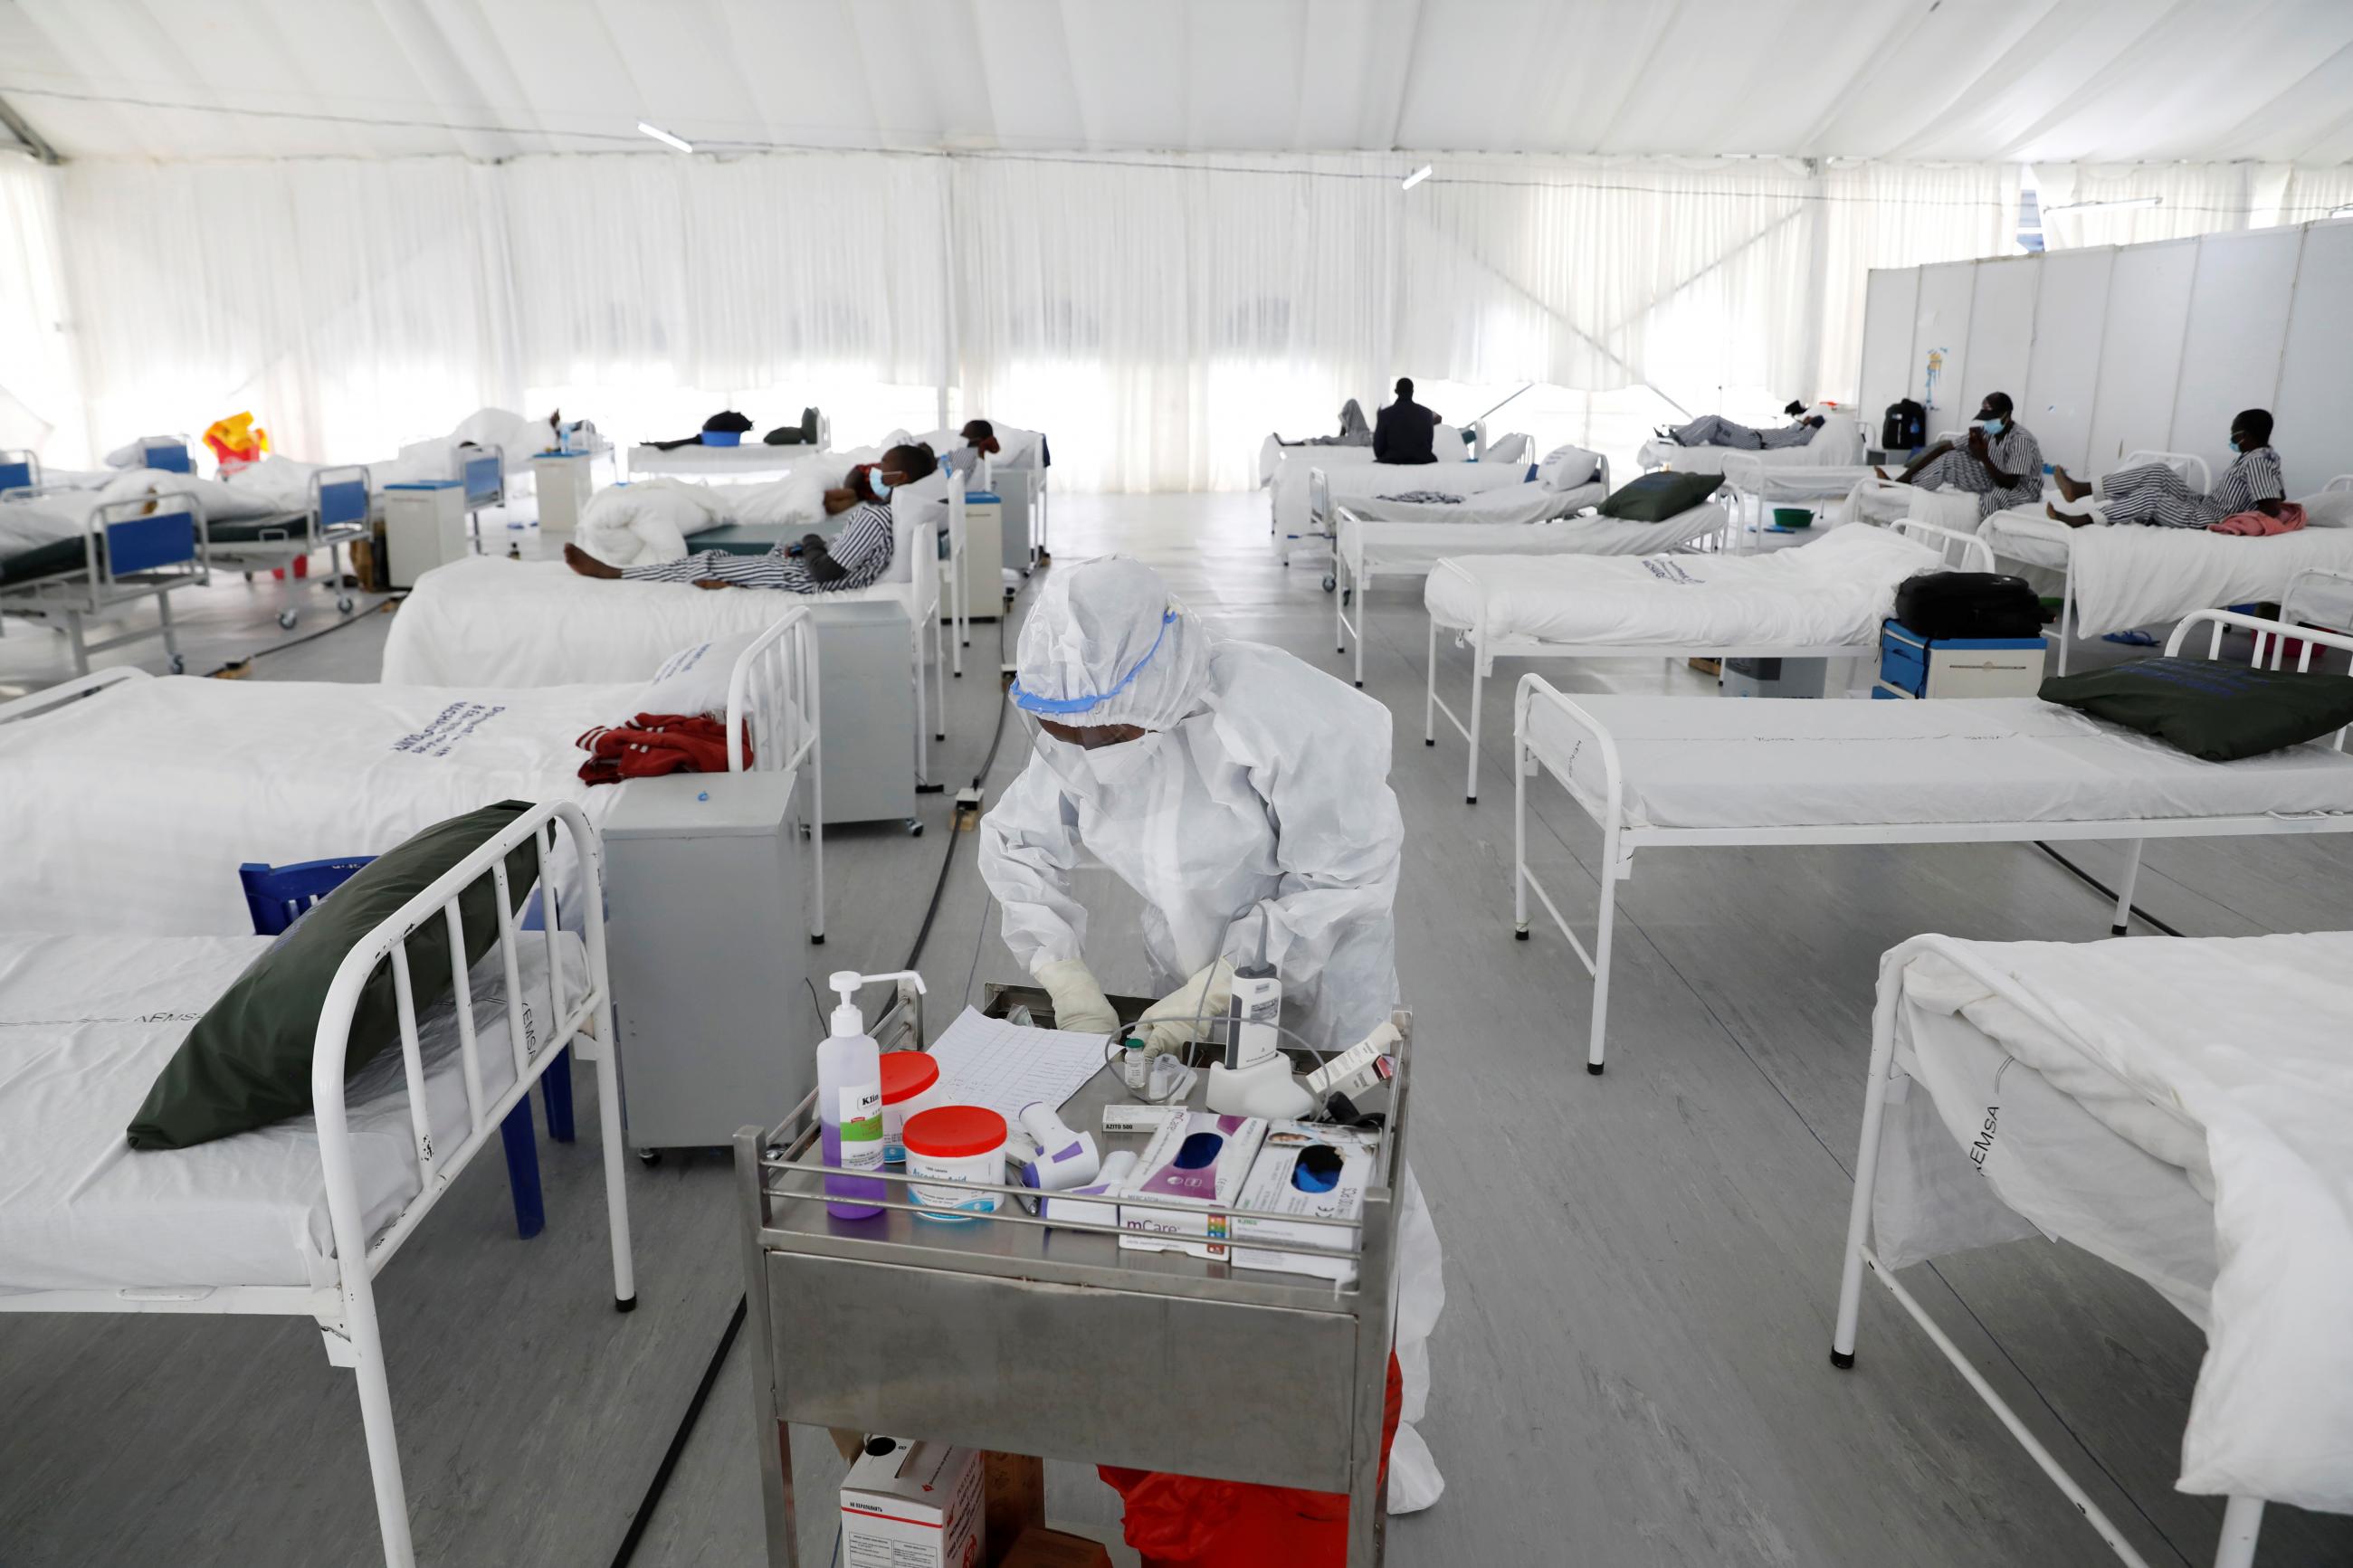 DOCUMENT DATE: July 24, 2020 A nurse works inside a field hospital builtÊon a soccer stadium in Machakos, as the number of confirmed coronavirus disease (COVID-19) cases continues to rise in Kenya, July 23, 2020.